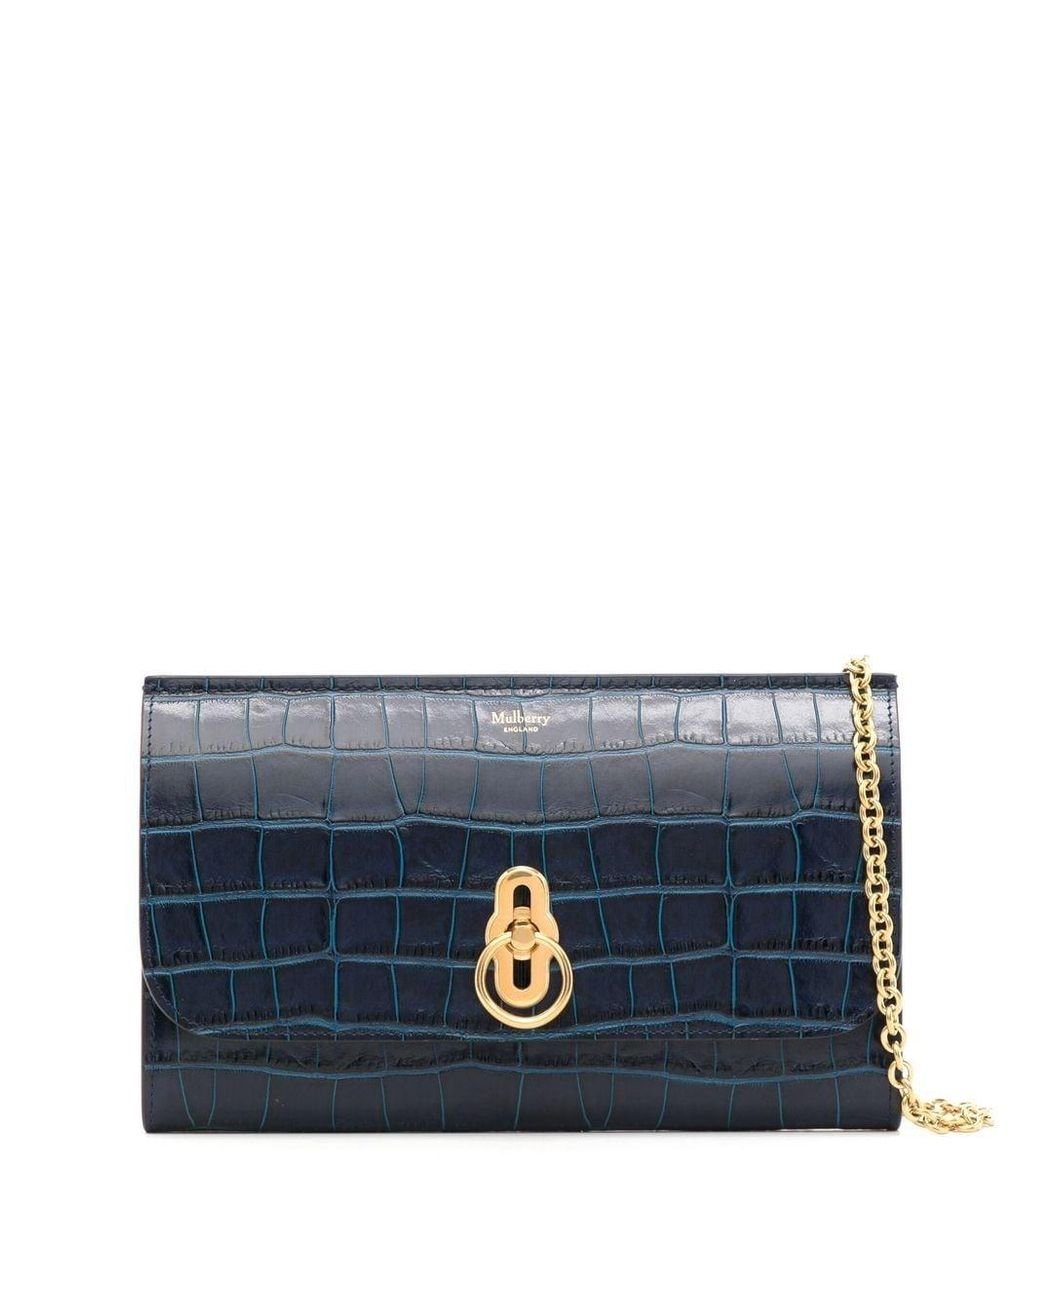 Mulberry Amberley Leather Clutch Bag in Blue | Lyst